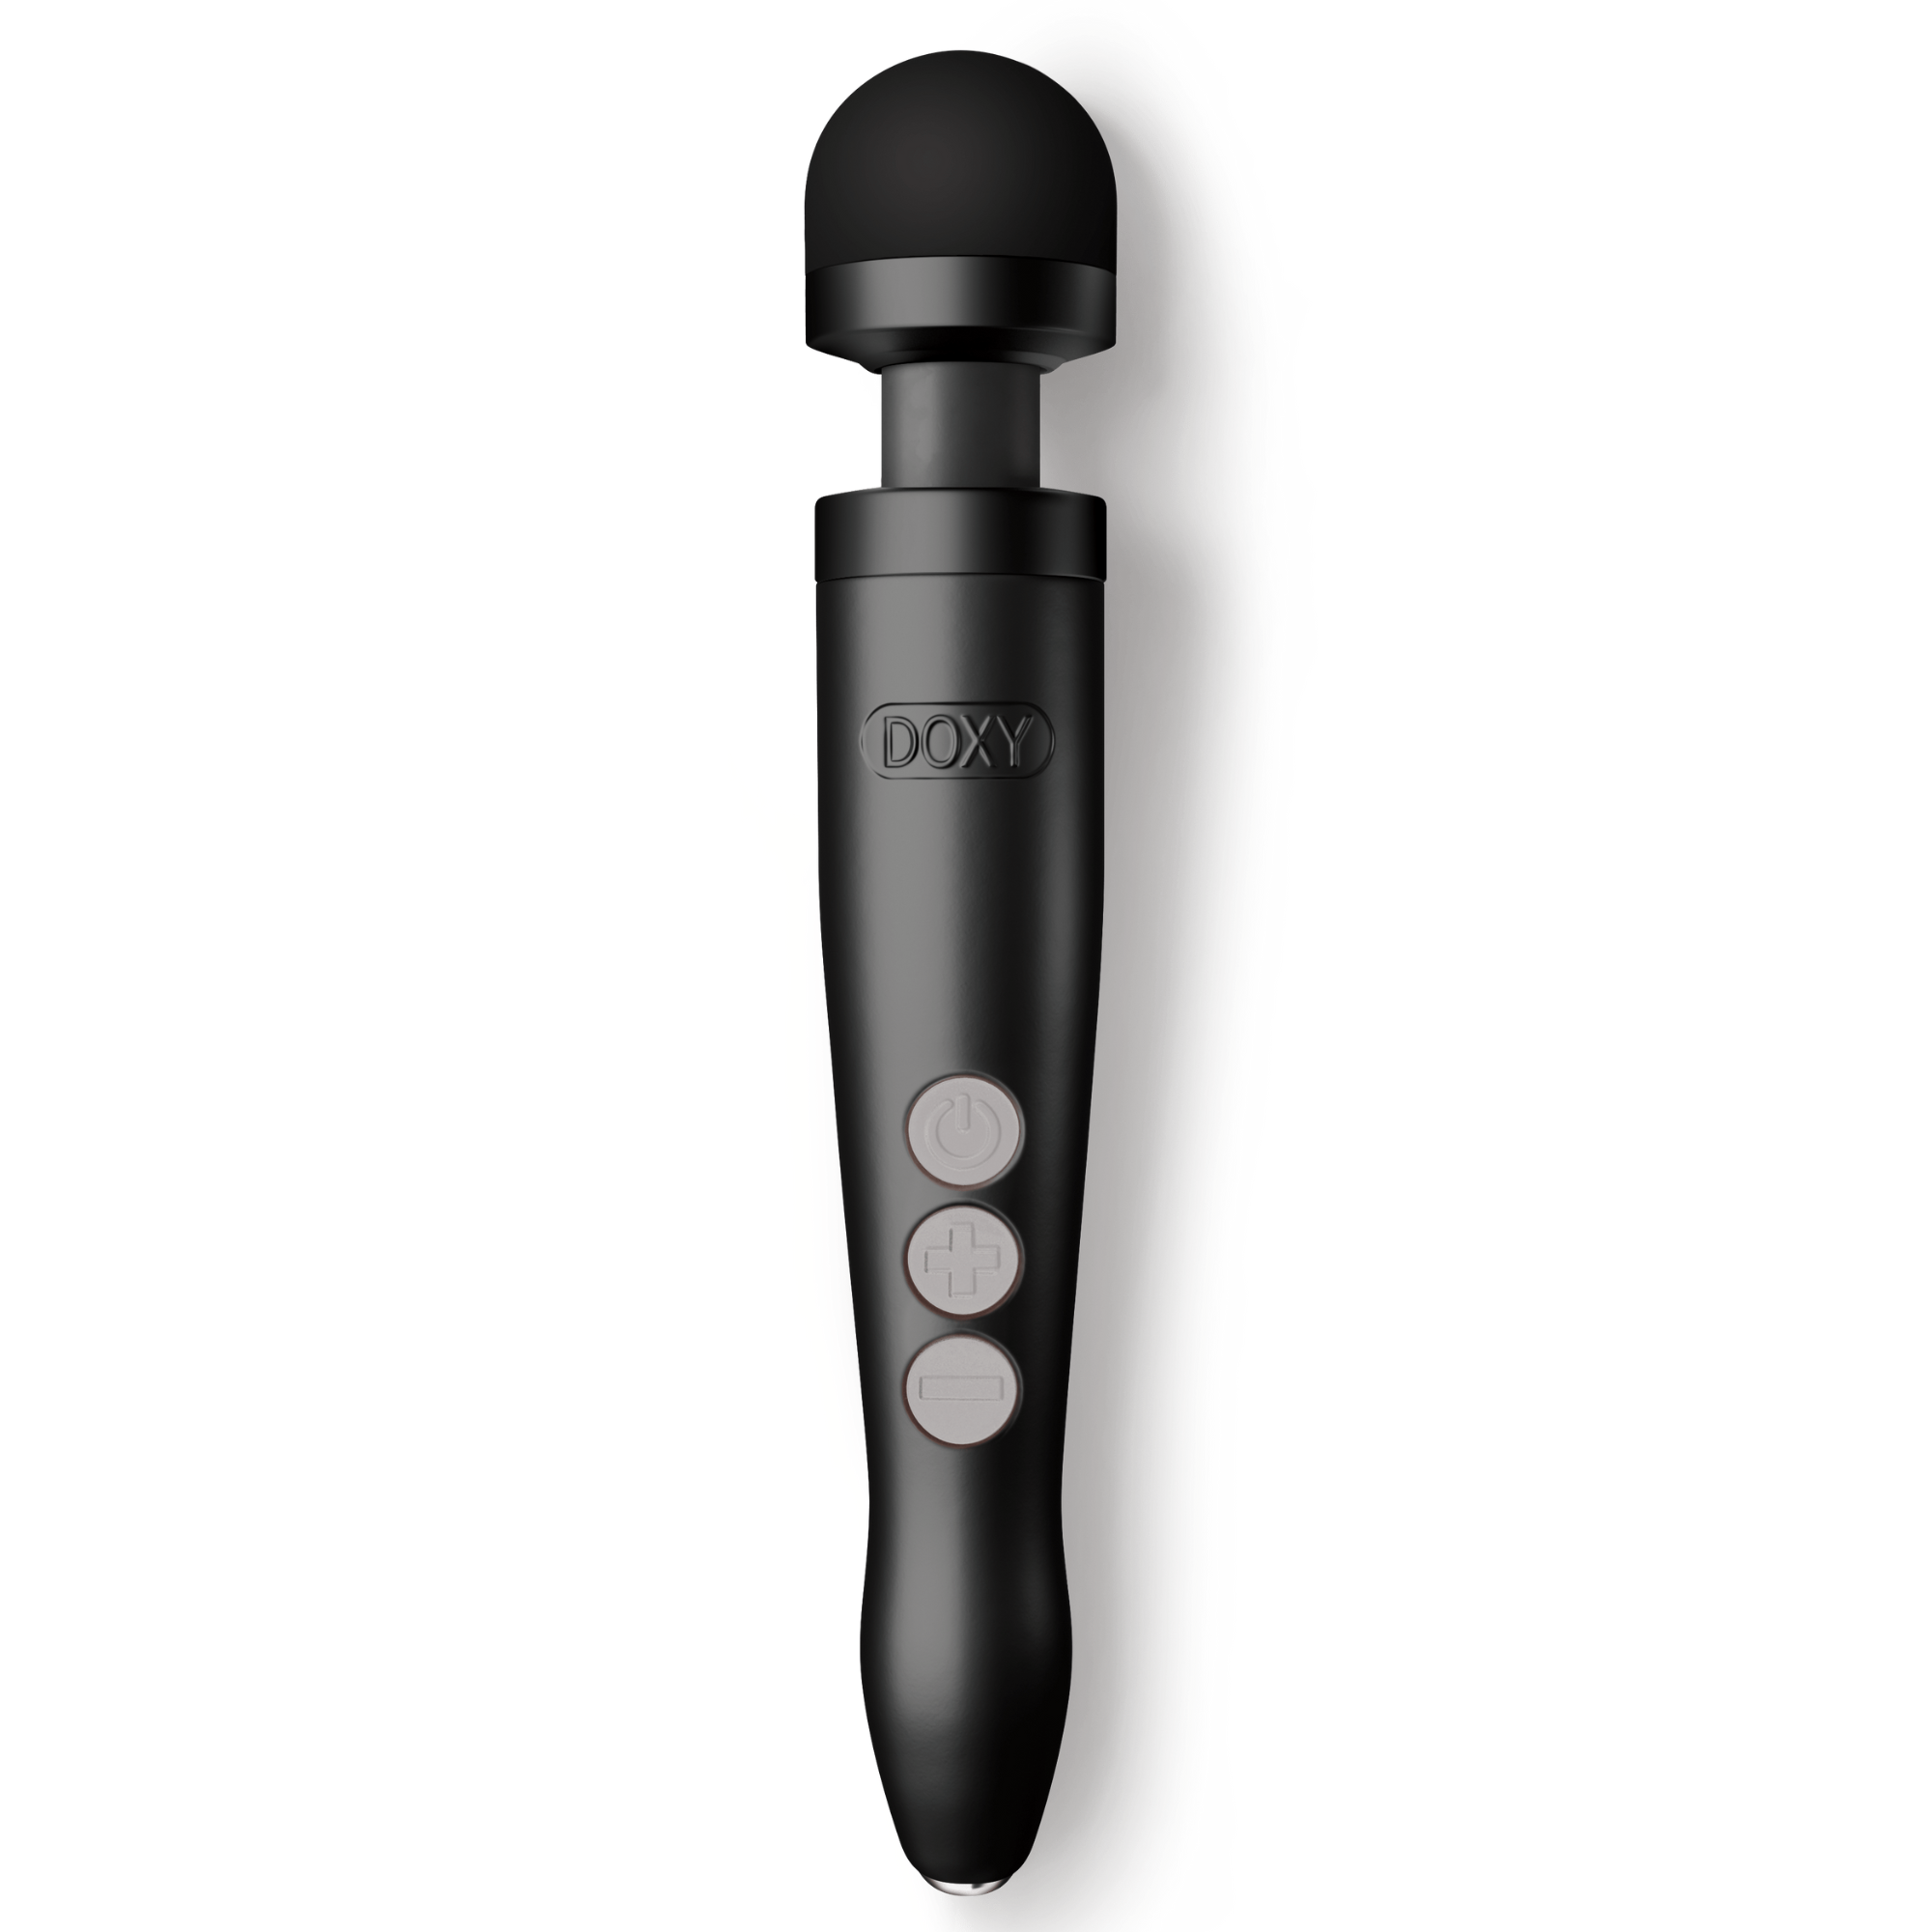 Doxy Die Cast 3R Rechargeable Compact Wand Vibrator | Melody's Room